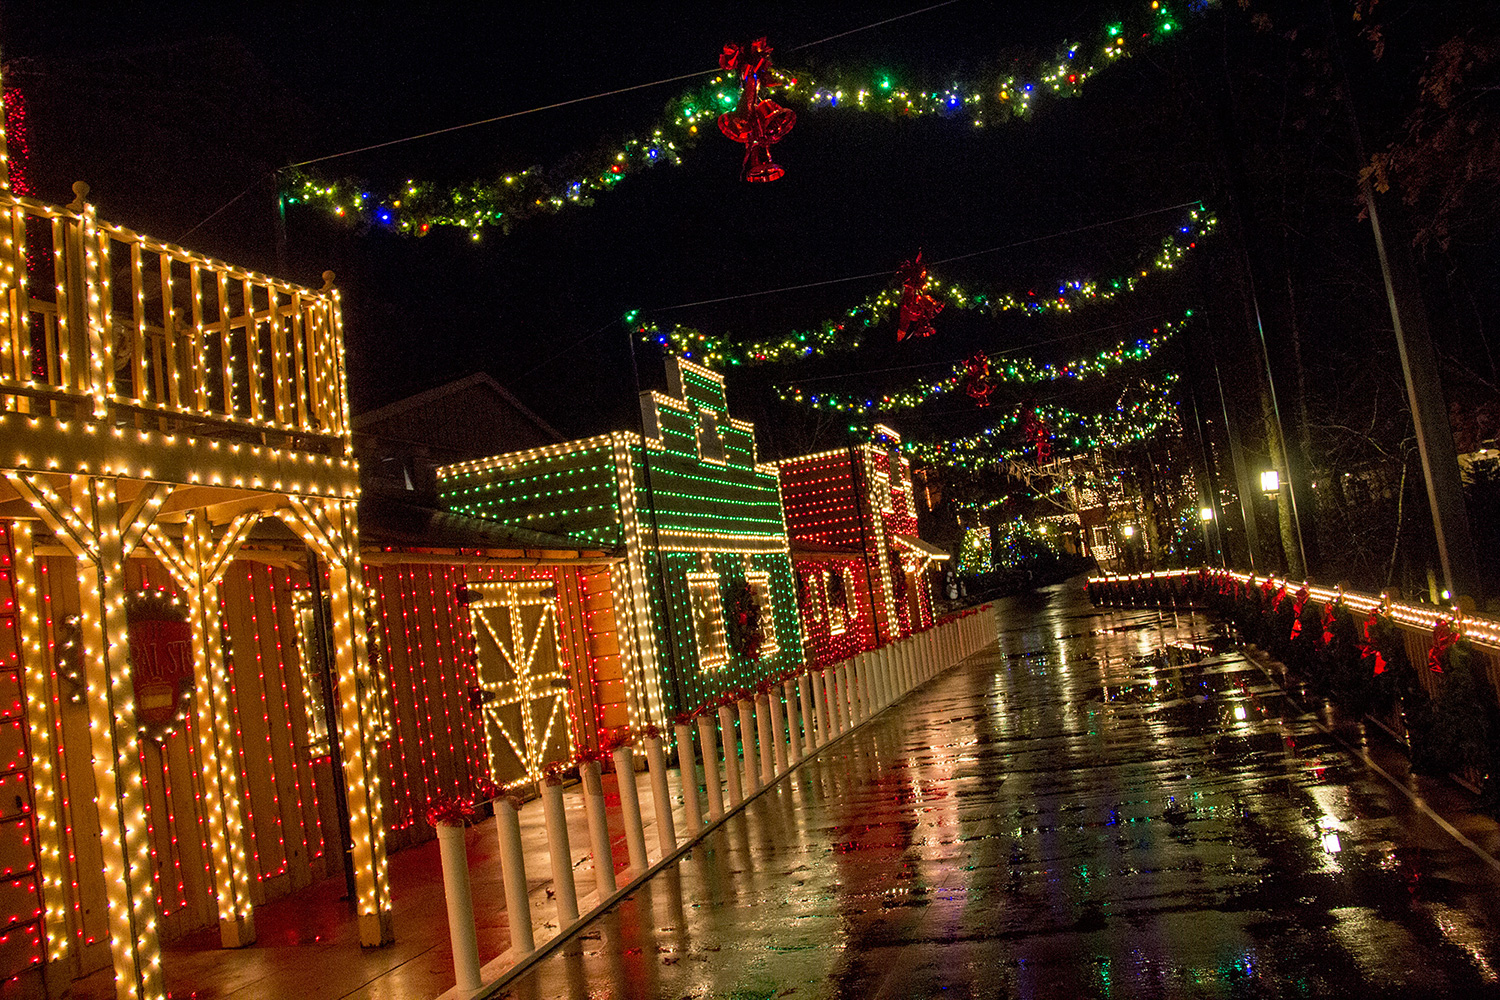 Vote for SDC in USA Today poll for favorite theme park holiday event | Branson Christmas1500 x 1000